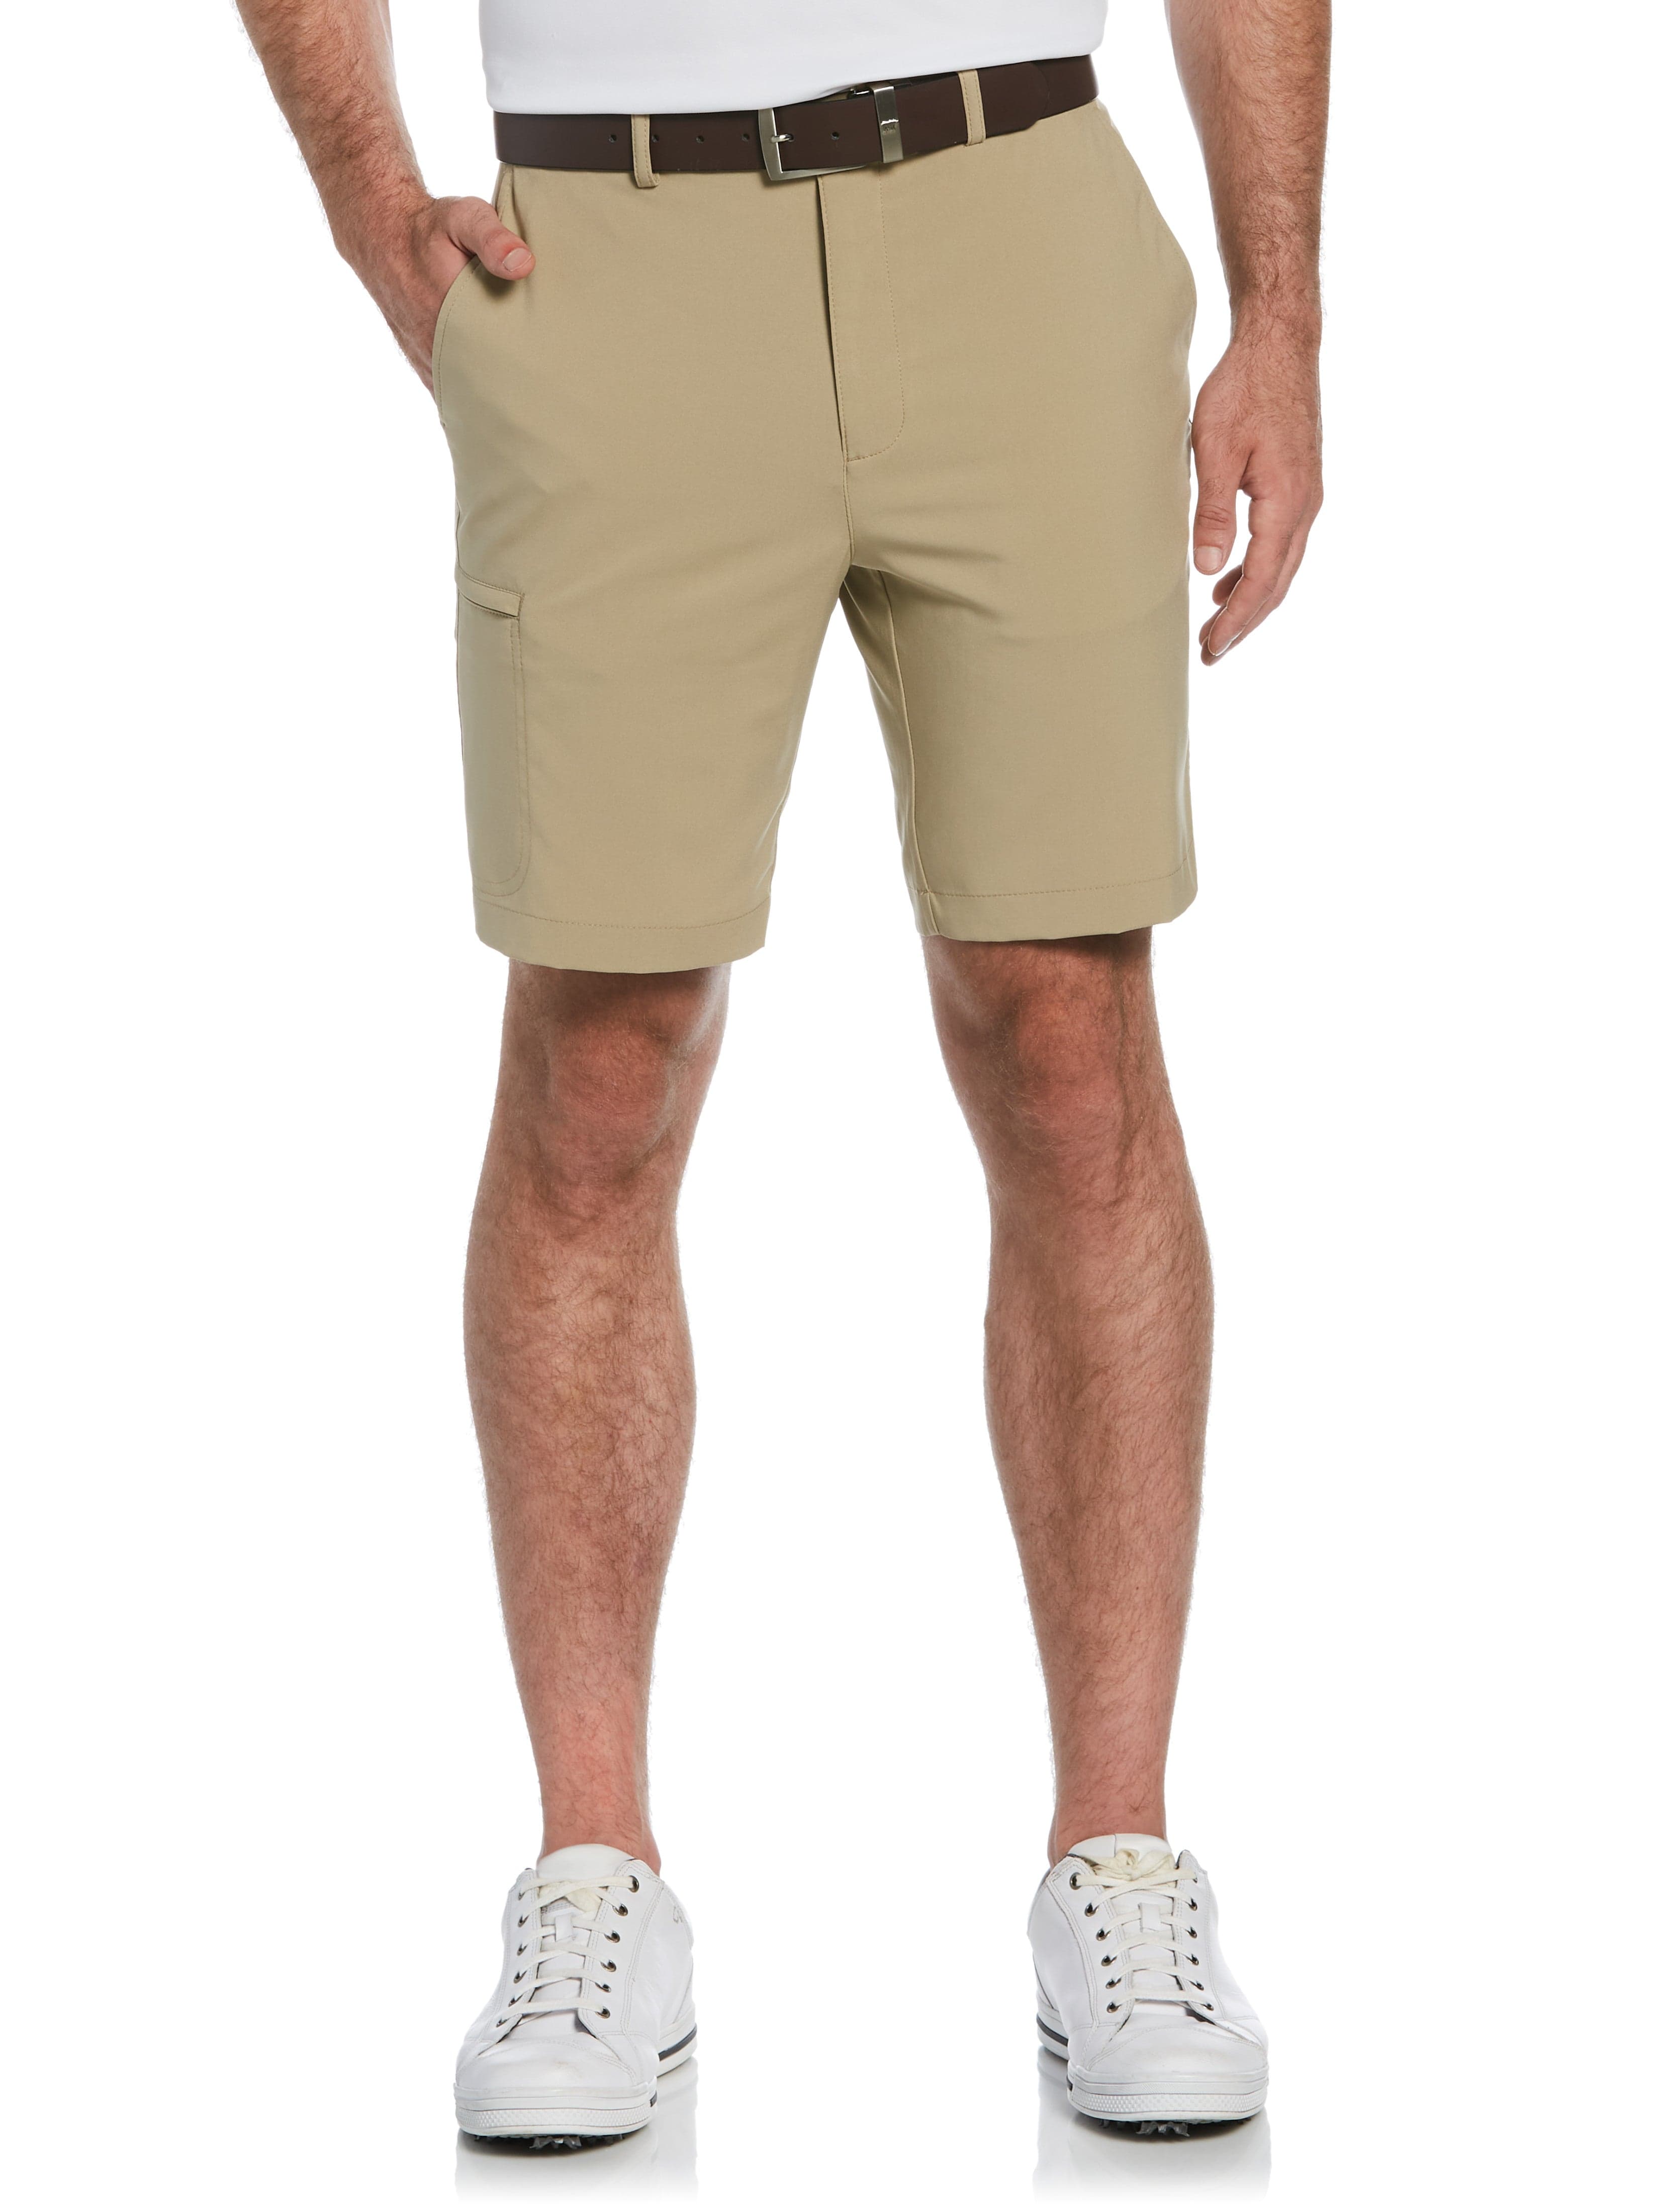 Jack Nicklaus Mens Flat Front Solid Golf Shorts w/ Cargo Pocket, Size 32, Chinchilla Beige, 100% Polyester | Golf Apparel Shop